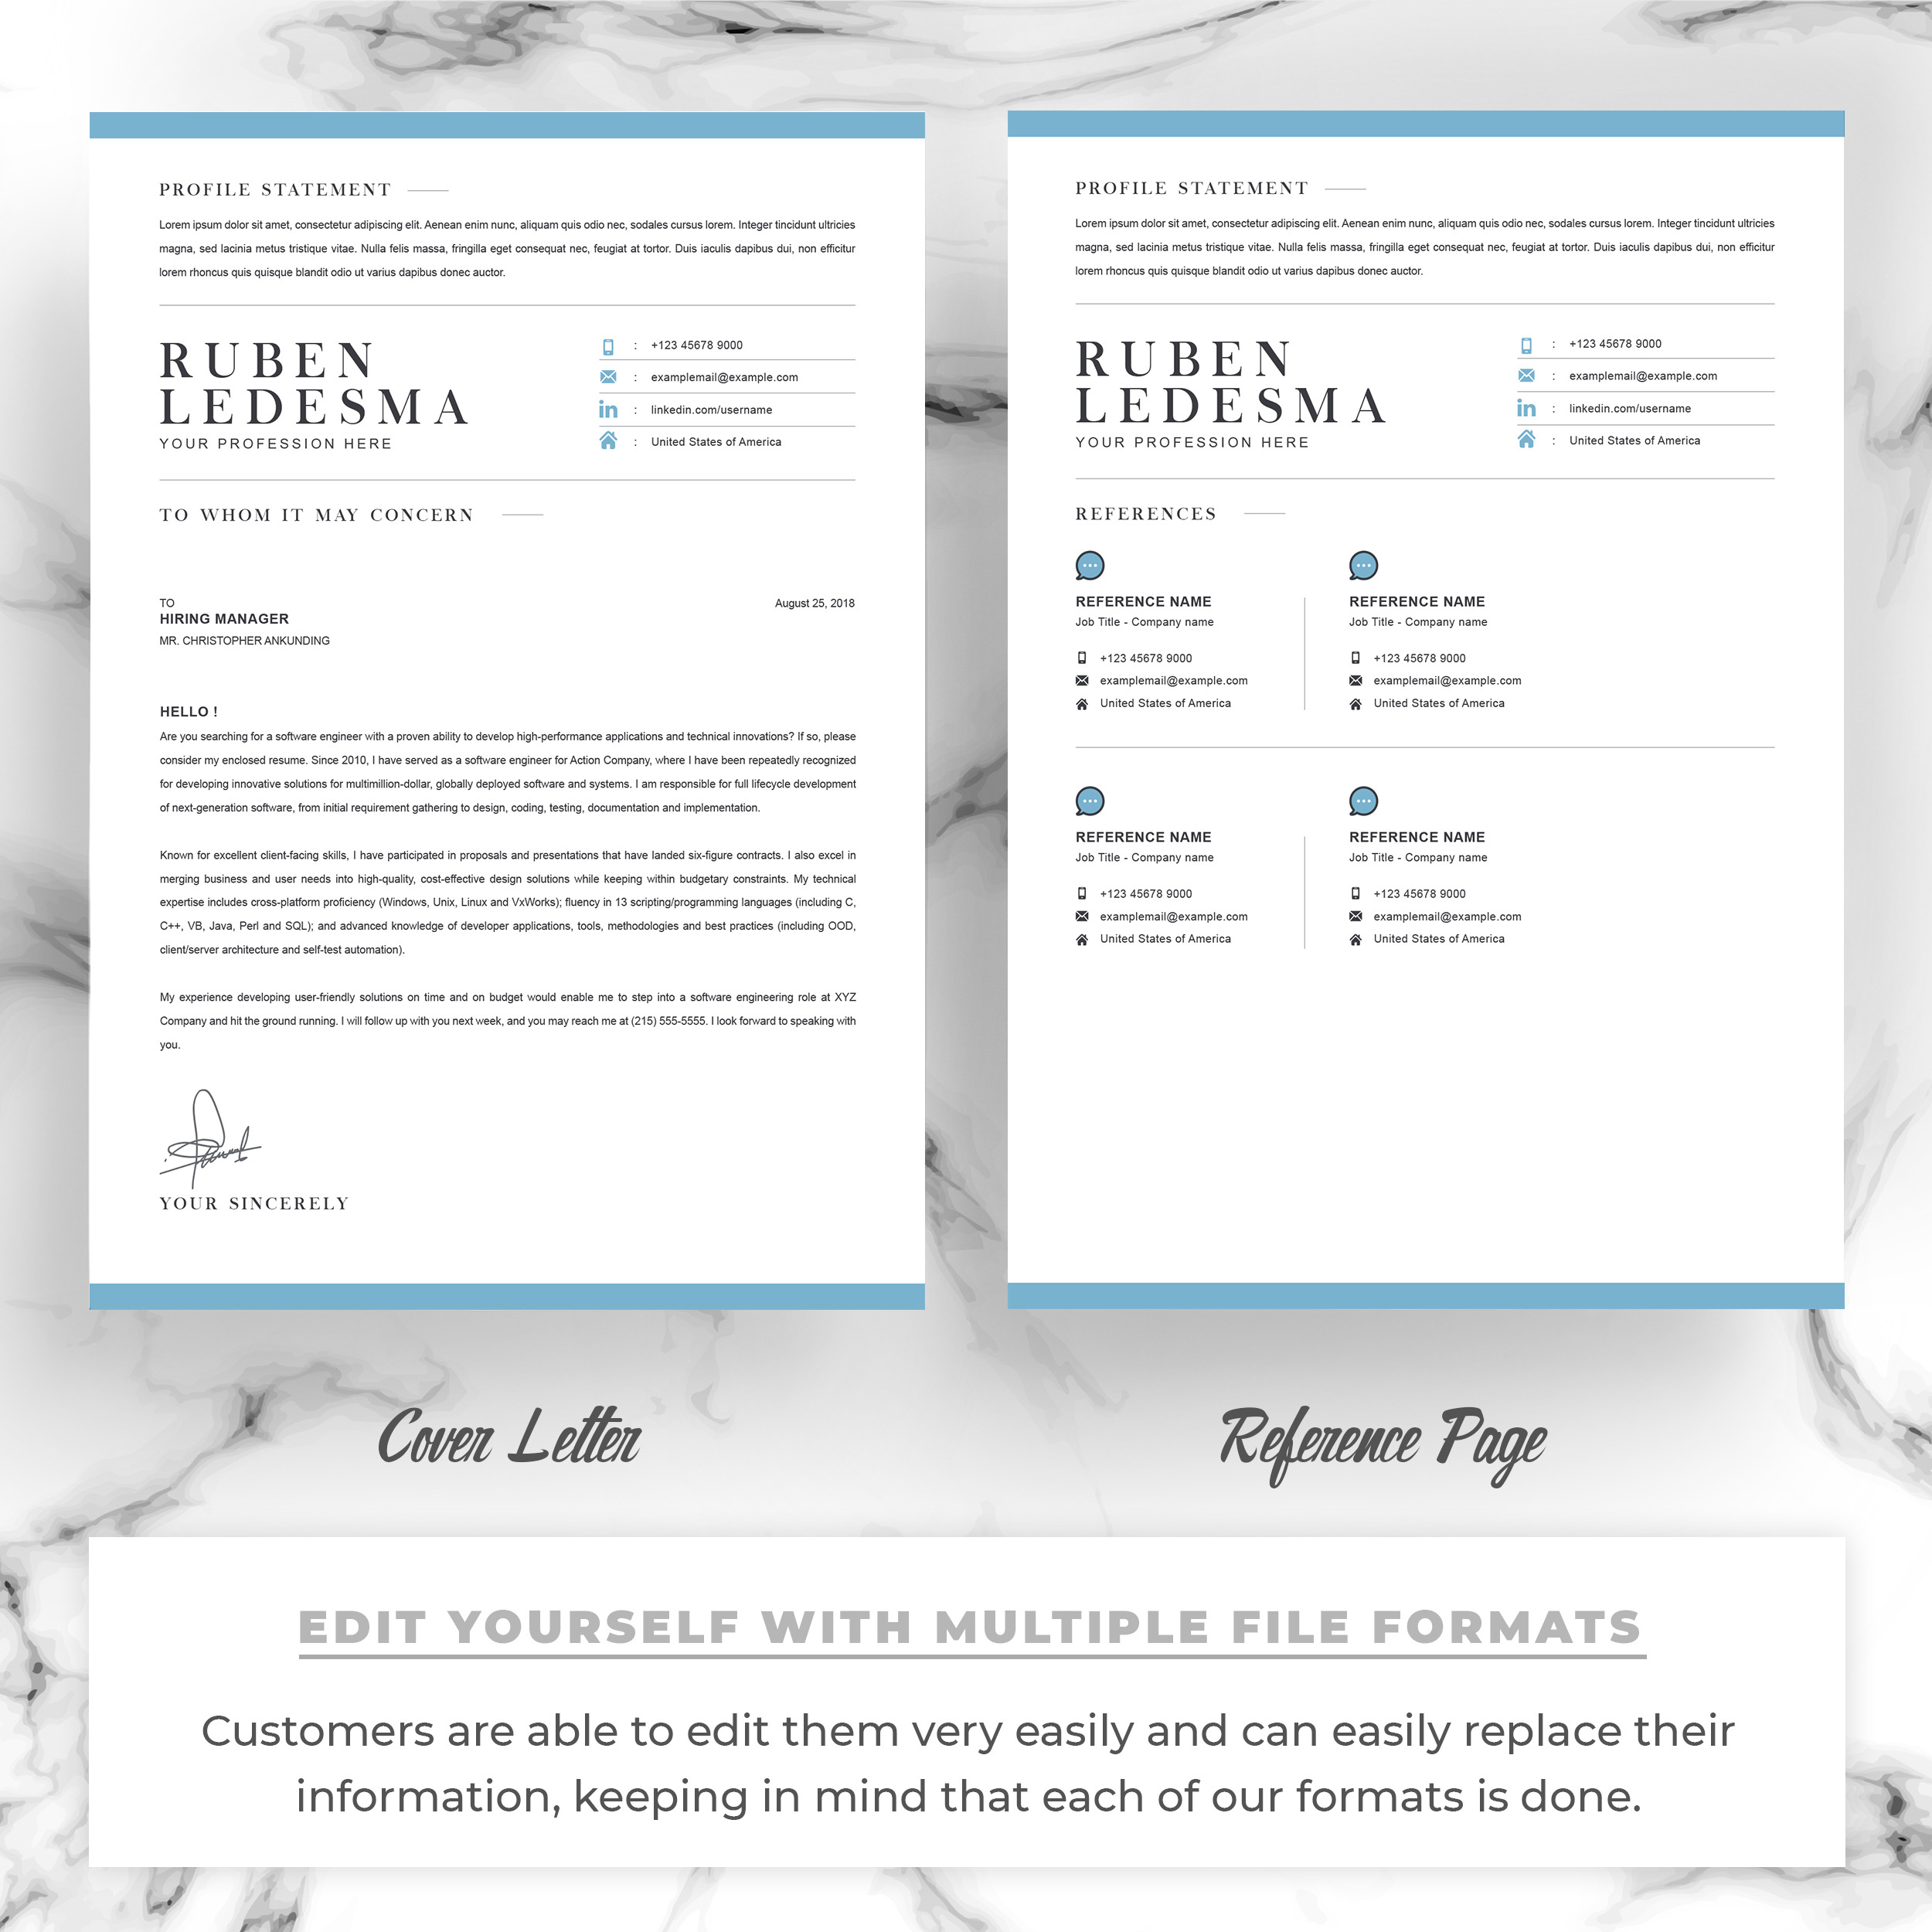 Free Word Cover Letter Template from cmkt-image-prd.freetls.fastly.net